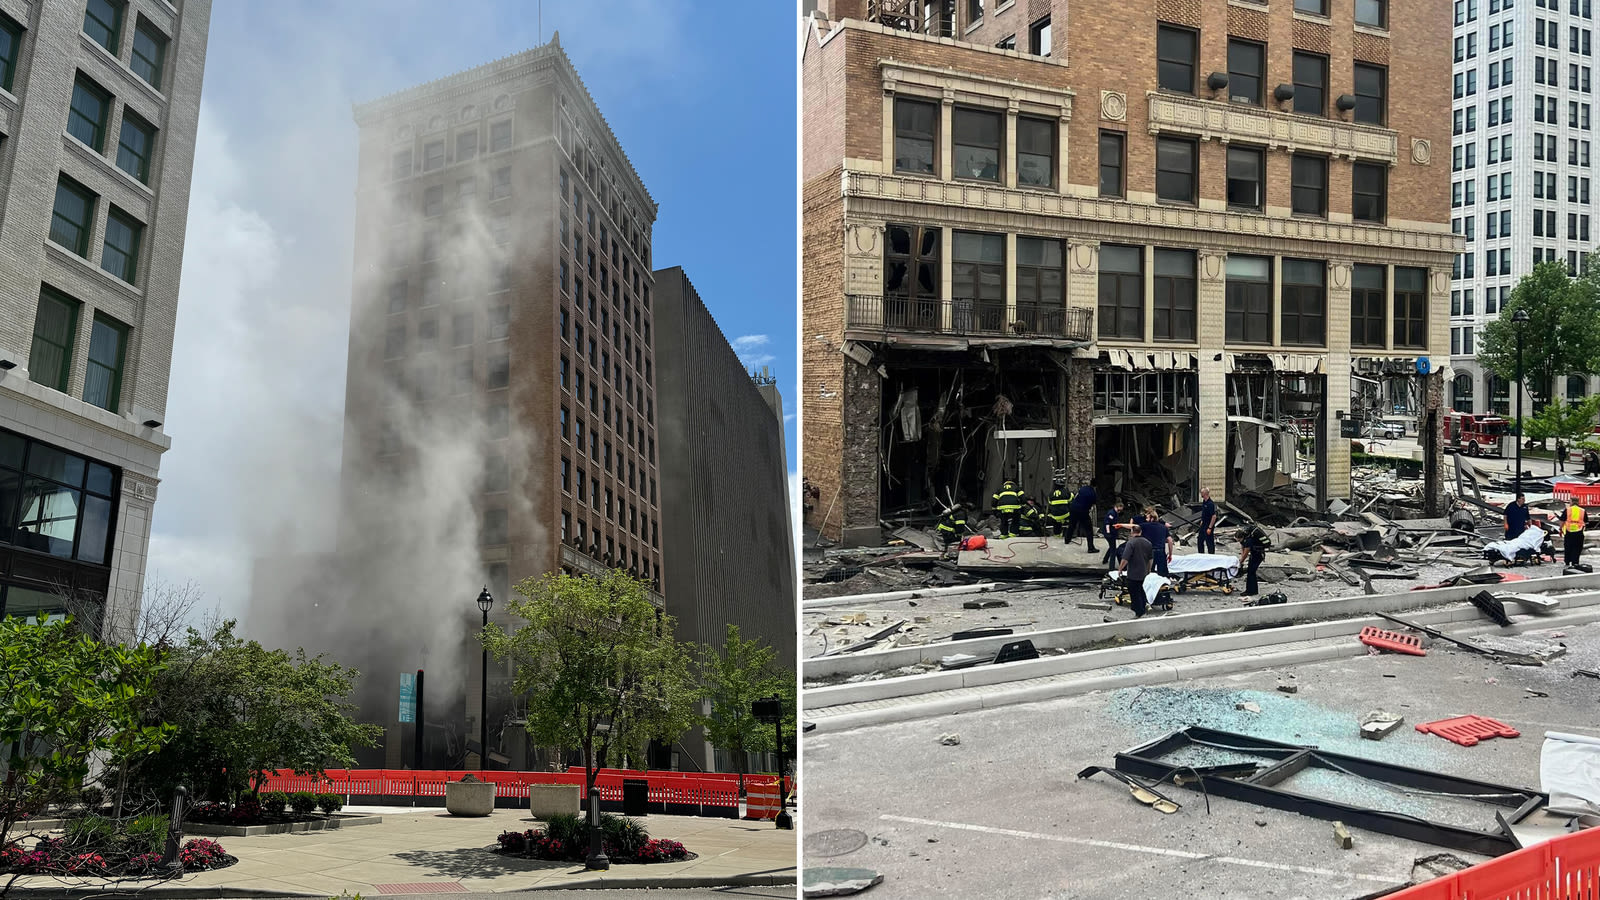 2 missing, multiple people injured in explosion at Chase bank in downtown Youngstown, Ohio